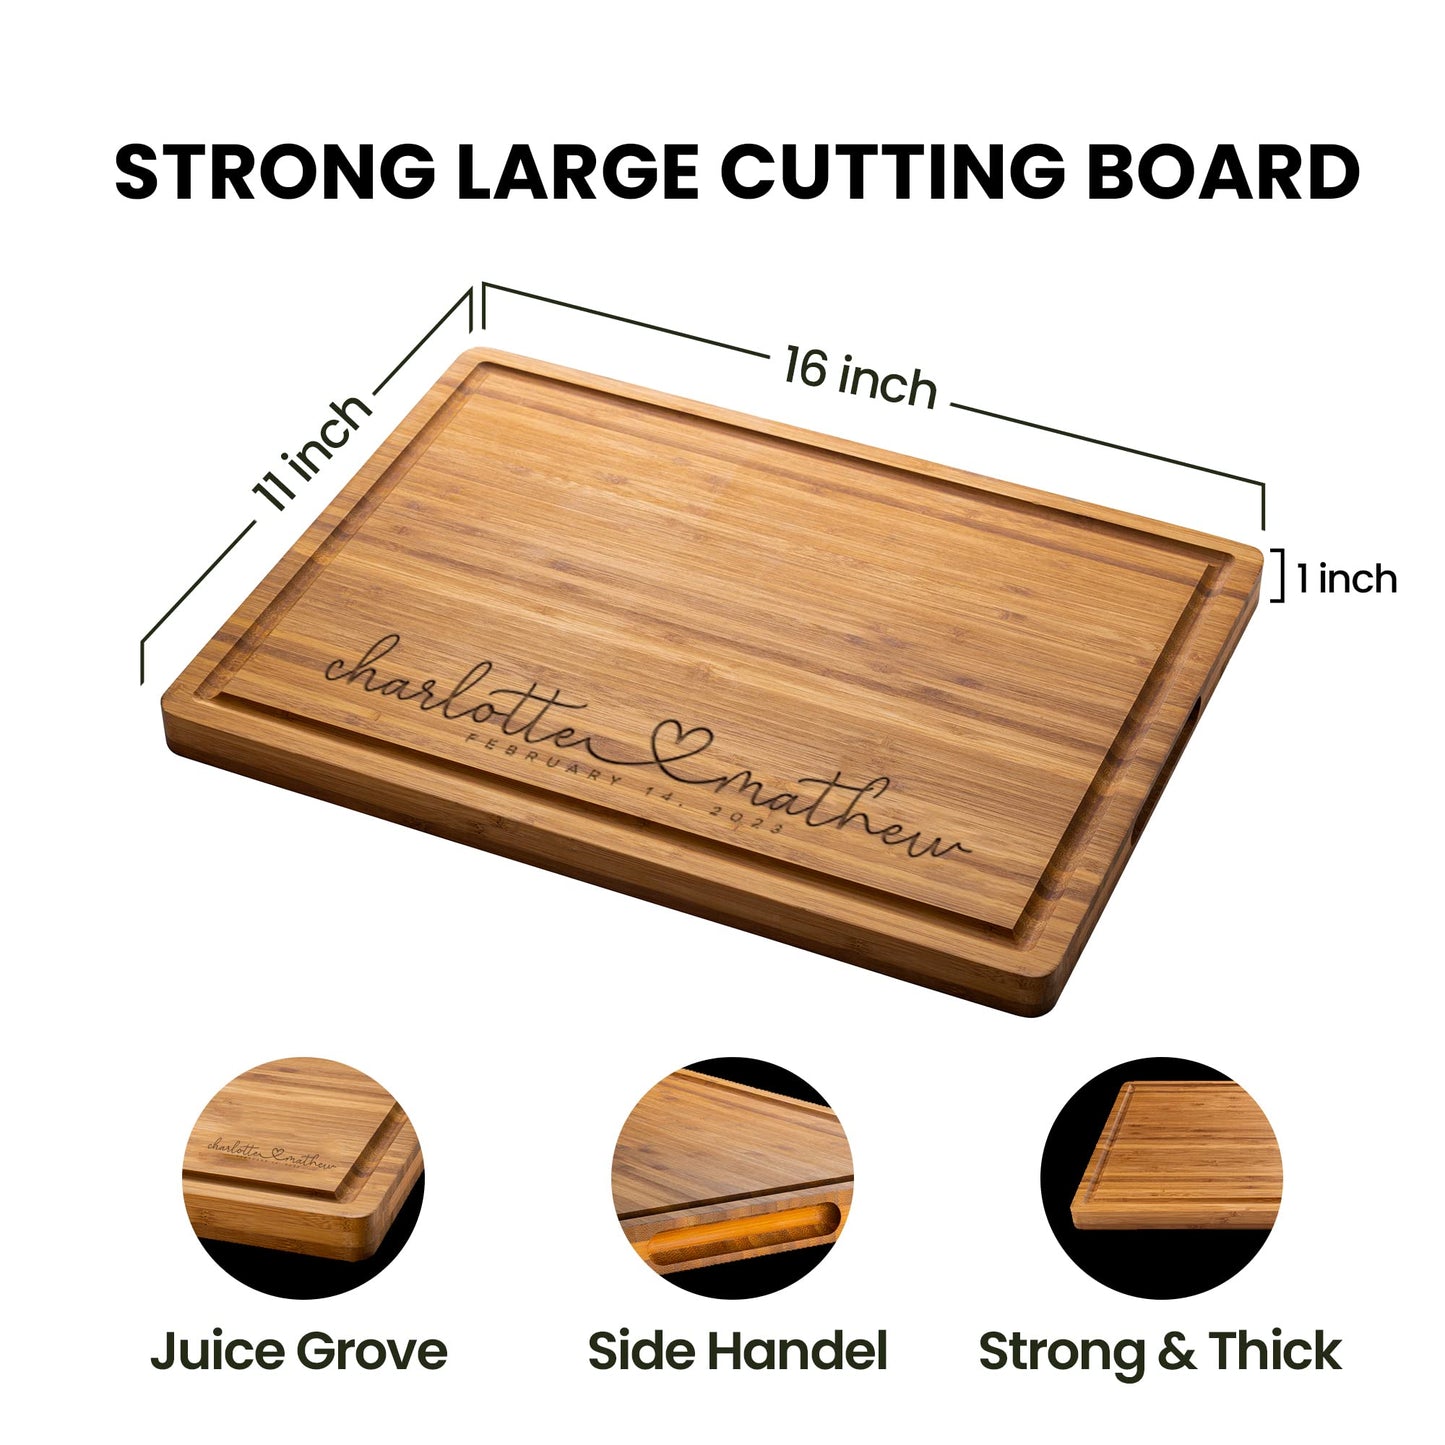 Personalized Wood Engraved Cutting Board - Customized Chopping Block - Unique Present for Wedding, Anniversary, Housewarming, Birthday, Holiday Gift